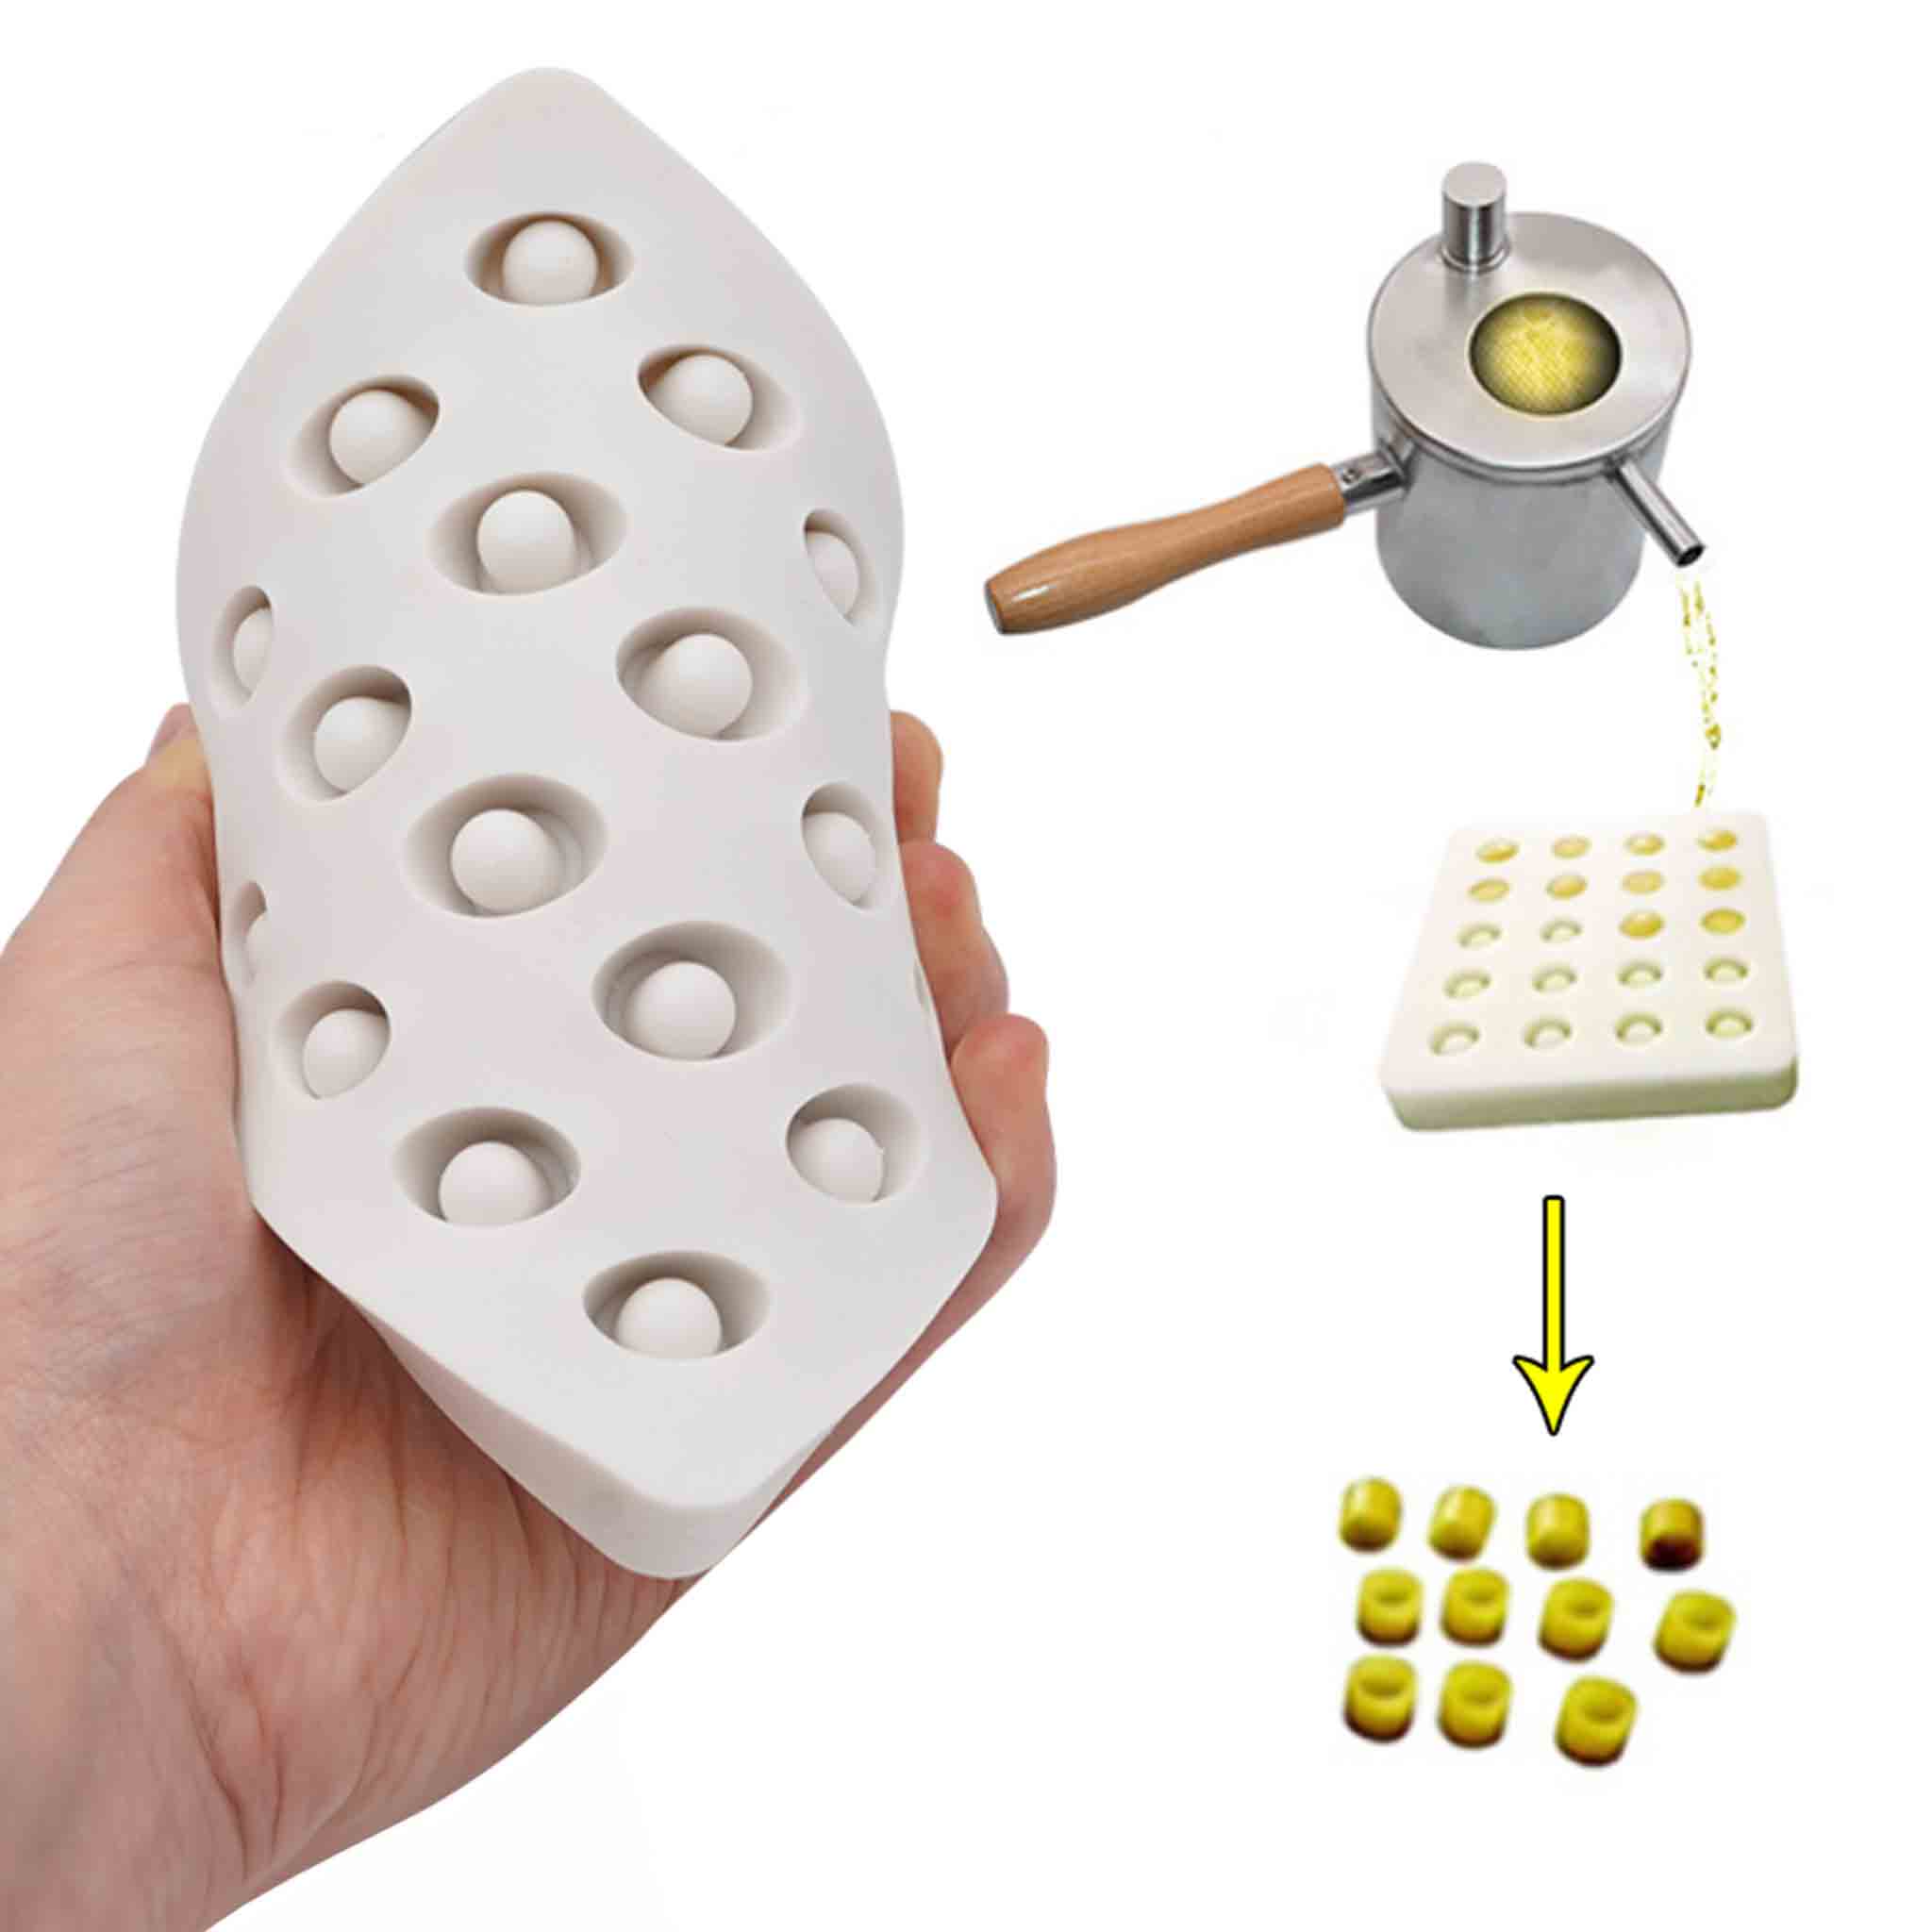 Natural Beeswax Queen Bee Cell Making Kit with Silicon Moulds and Wax Melting Burette Pot - Queen collection by Buzzbee Beekeeping Supplies